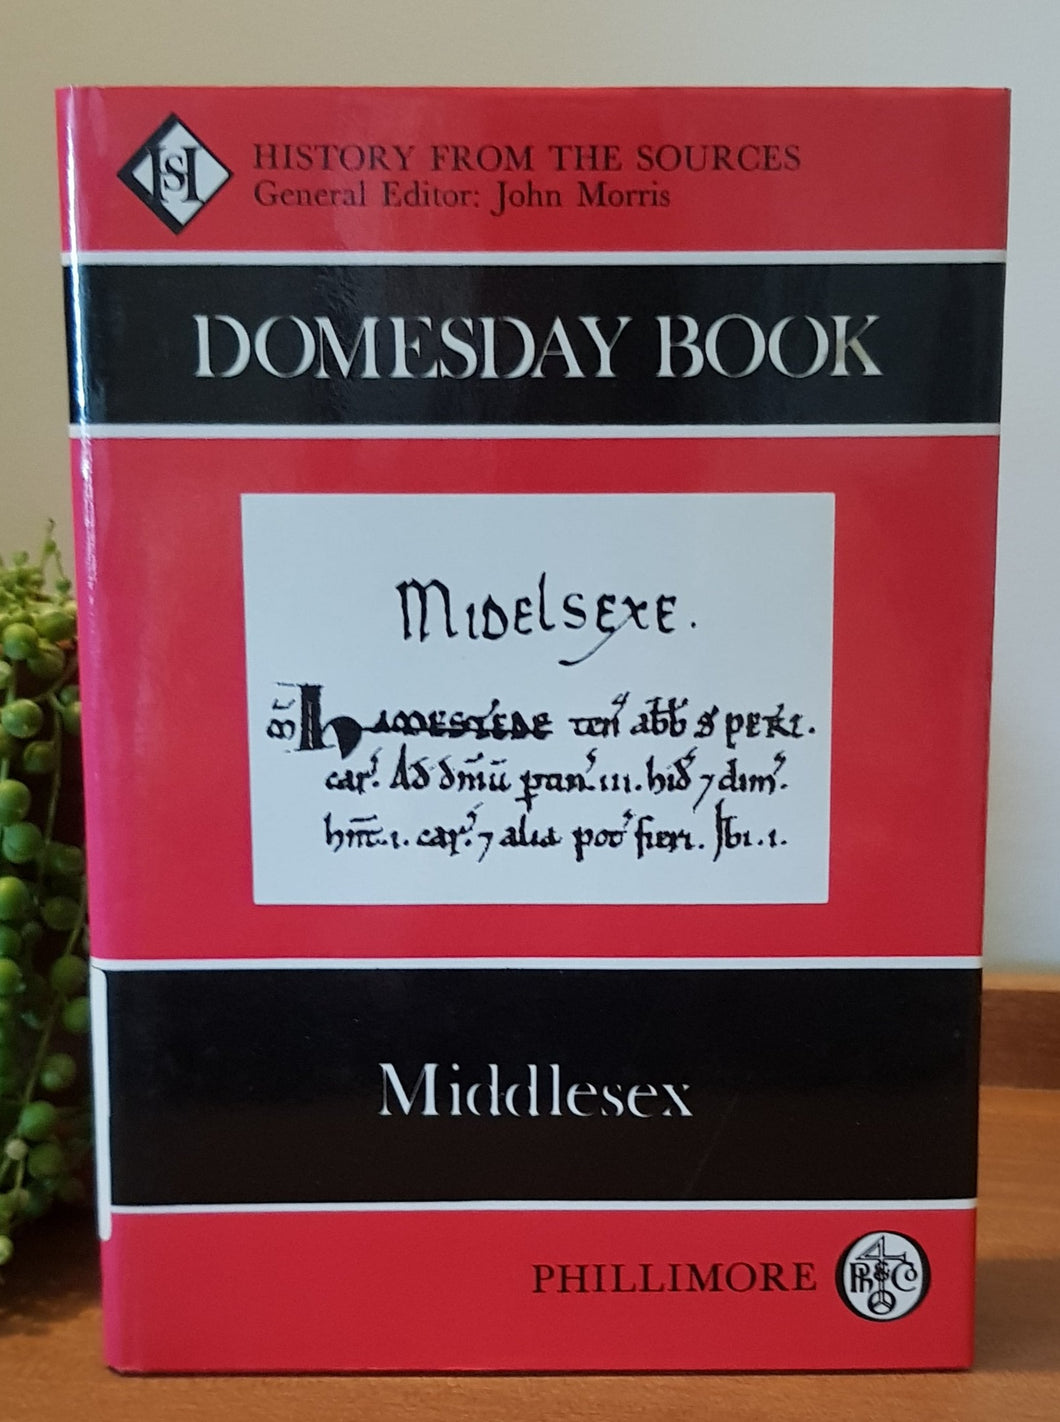 Domesday Book: Vol 11 Middlesex by John Morris